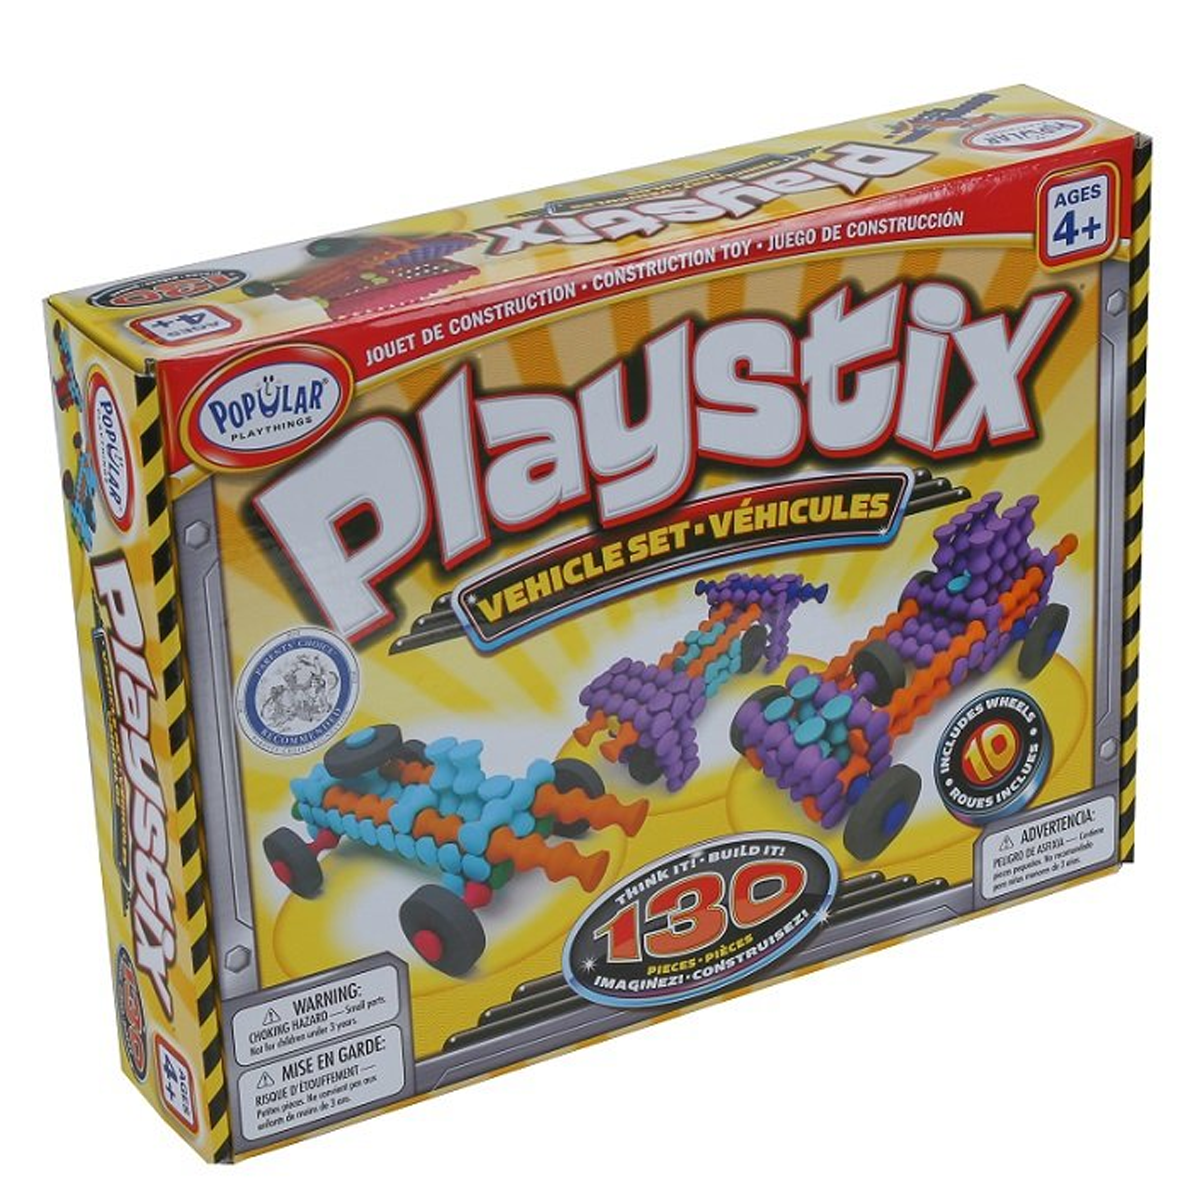 Popular Playthings Playstix Vehicles Set (130 pieces)